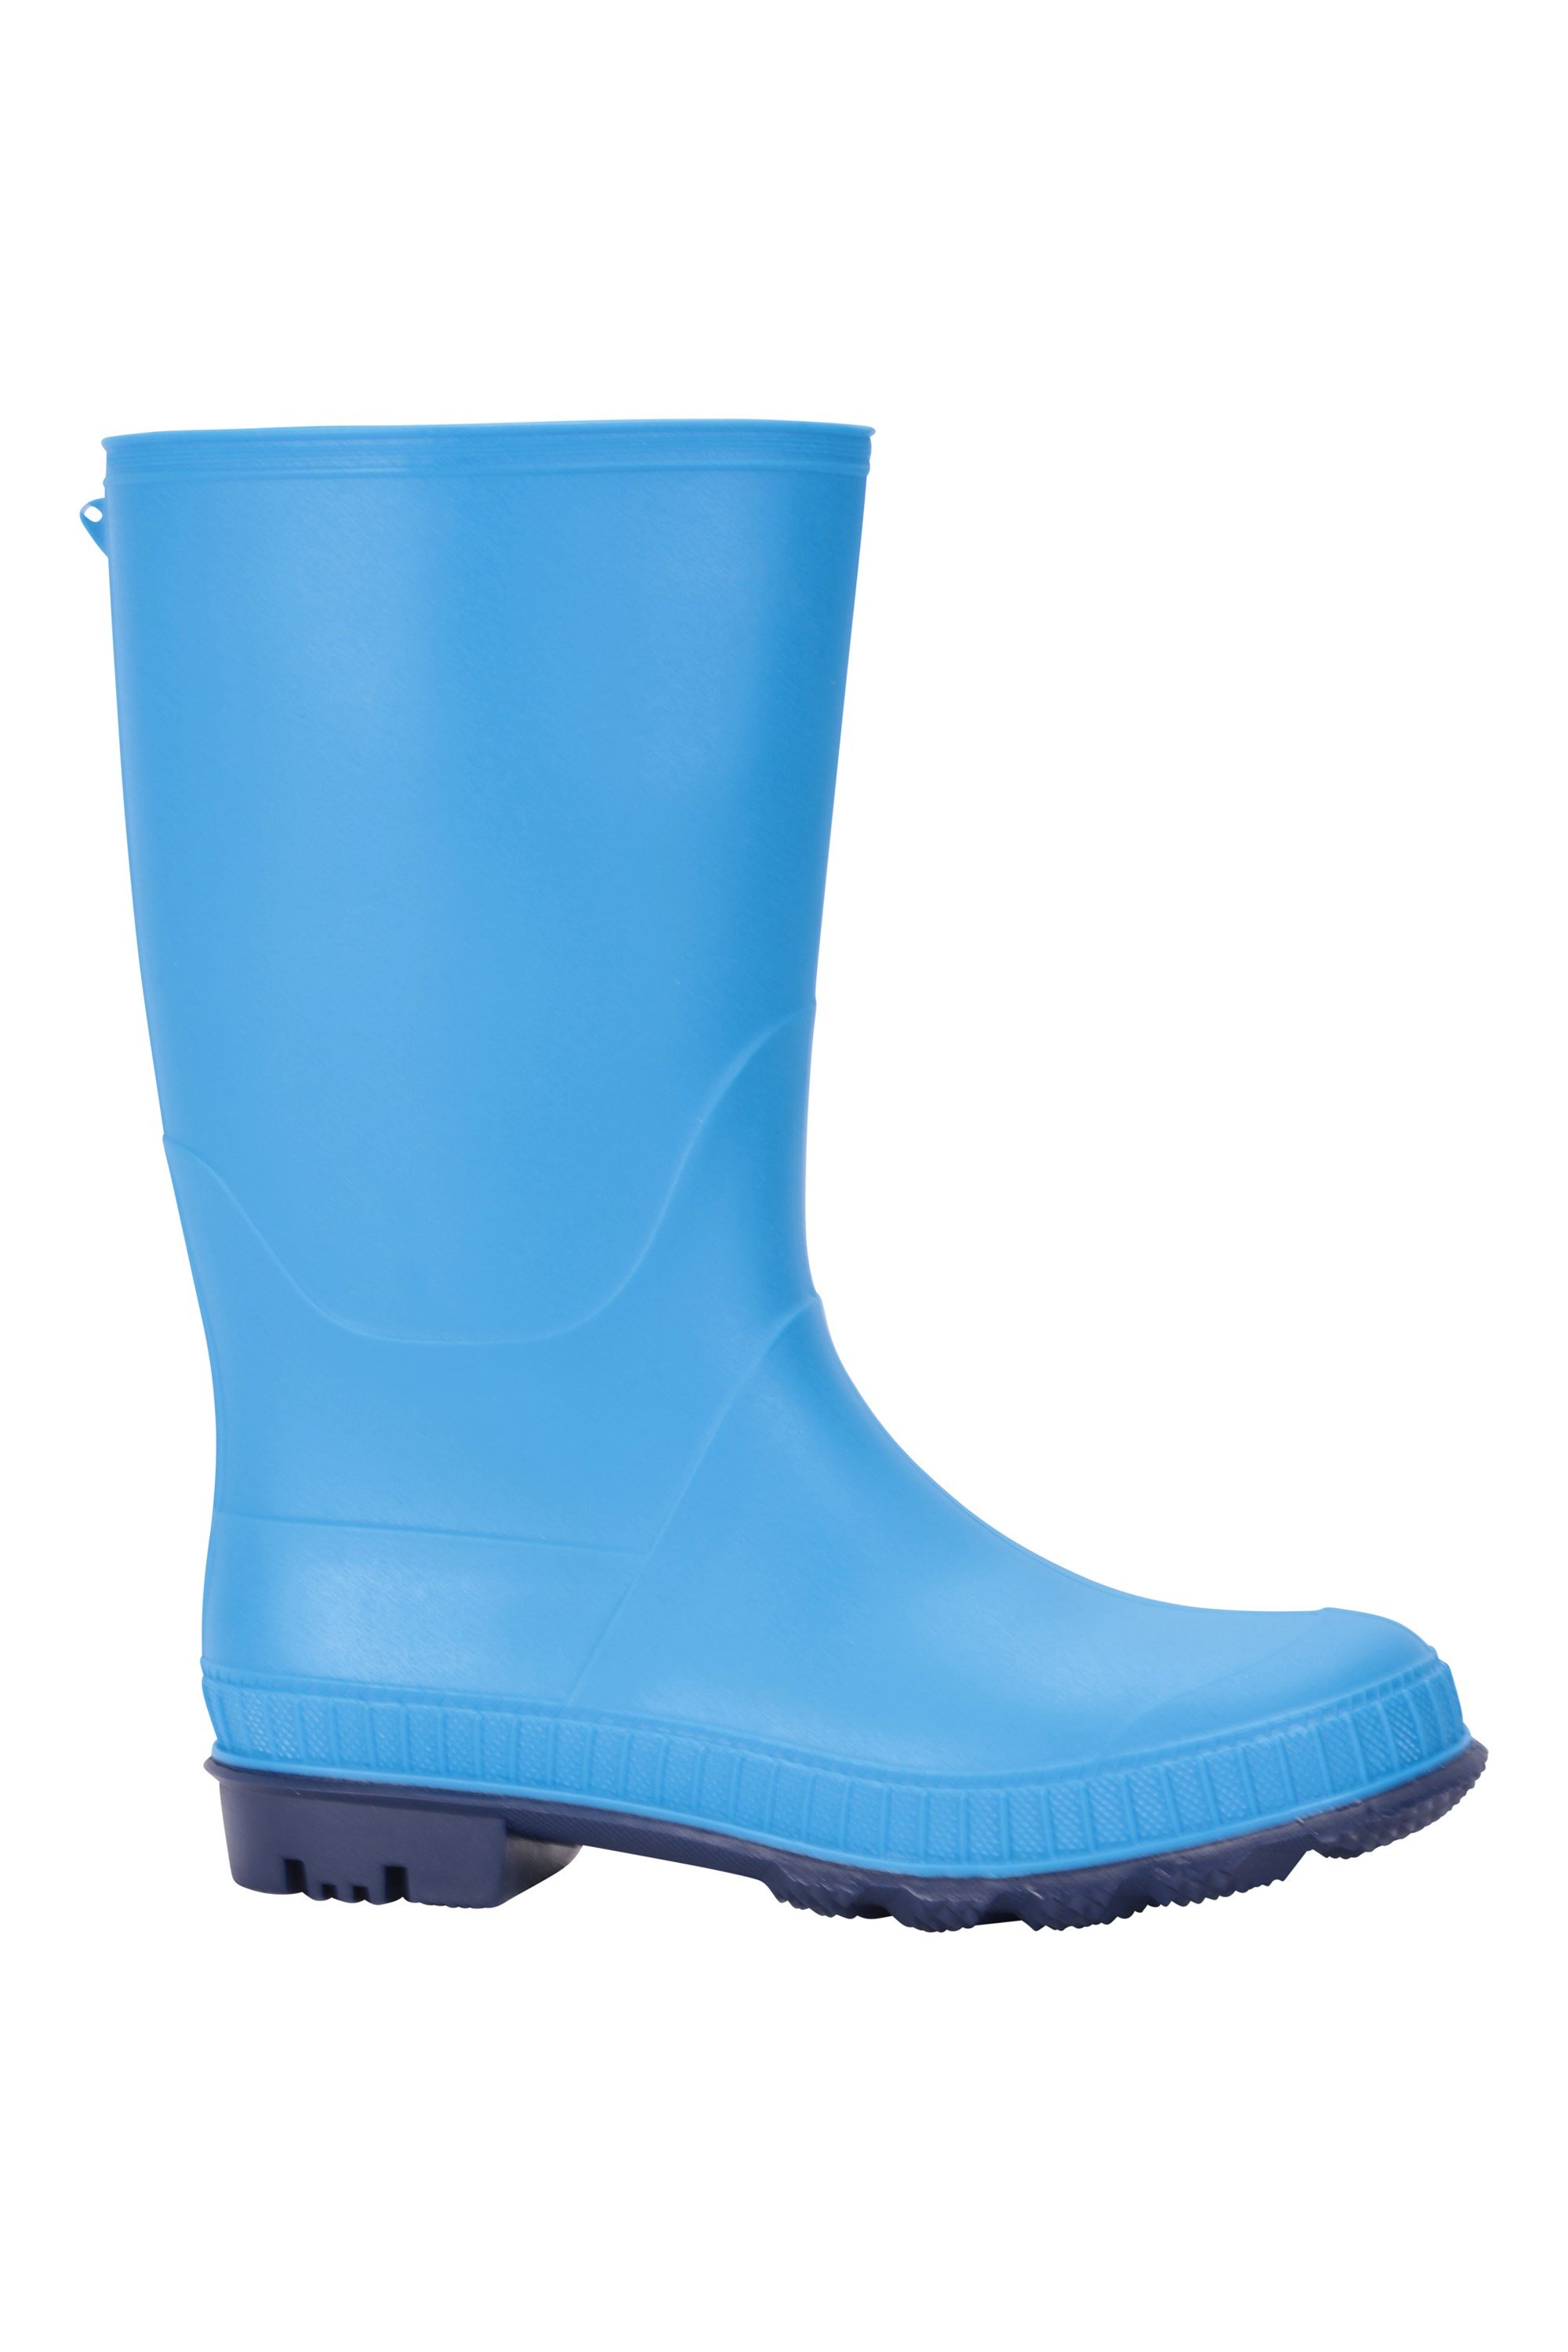 Mountain Warehouse Wms  Splash Wide Calf Printed Womens Wellie In Turquoise UK